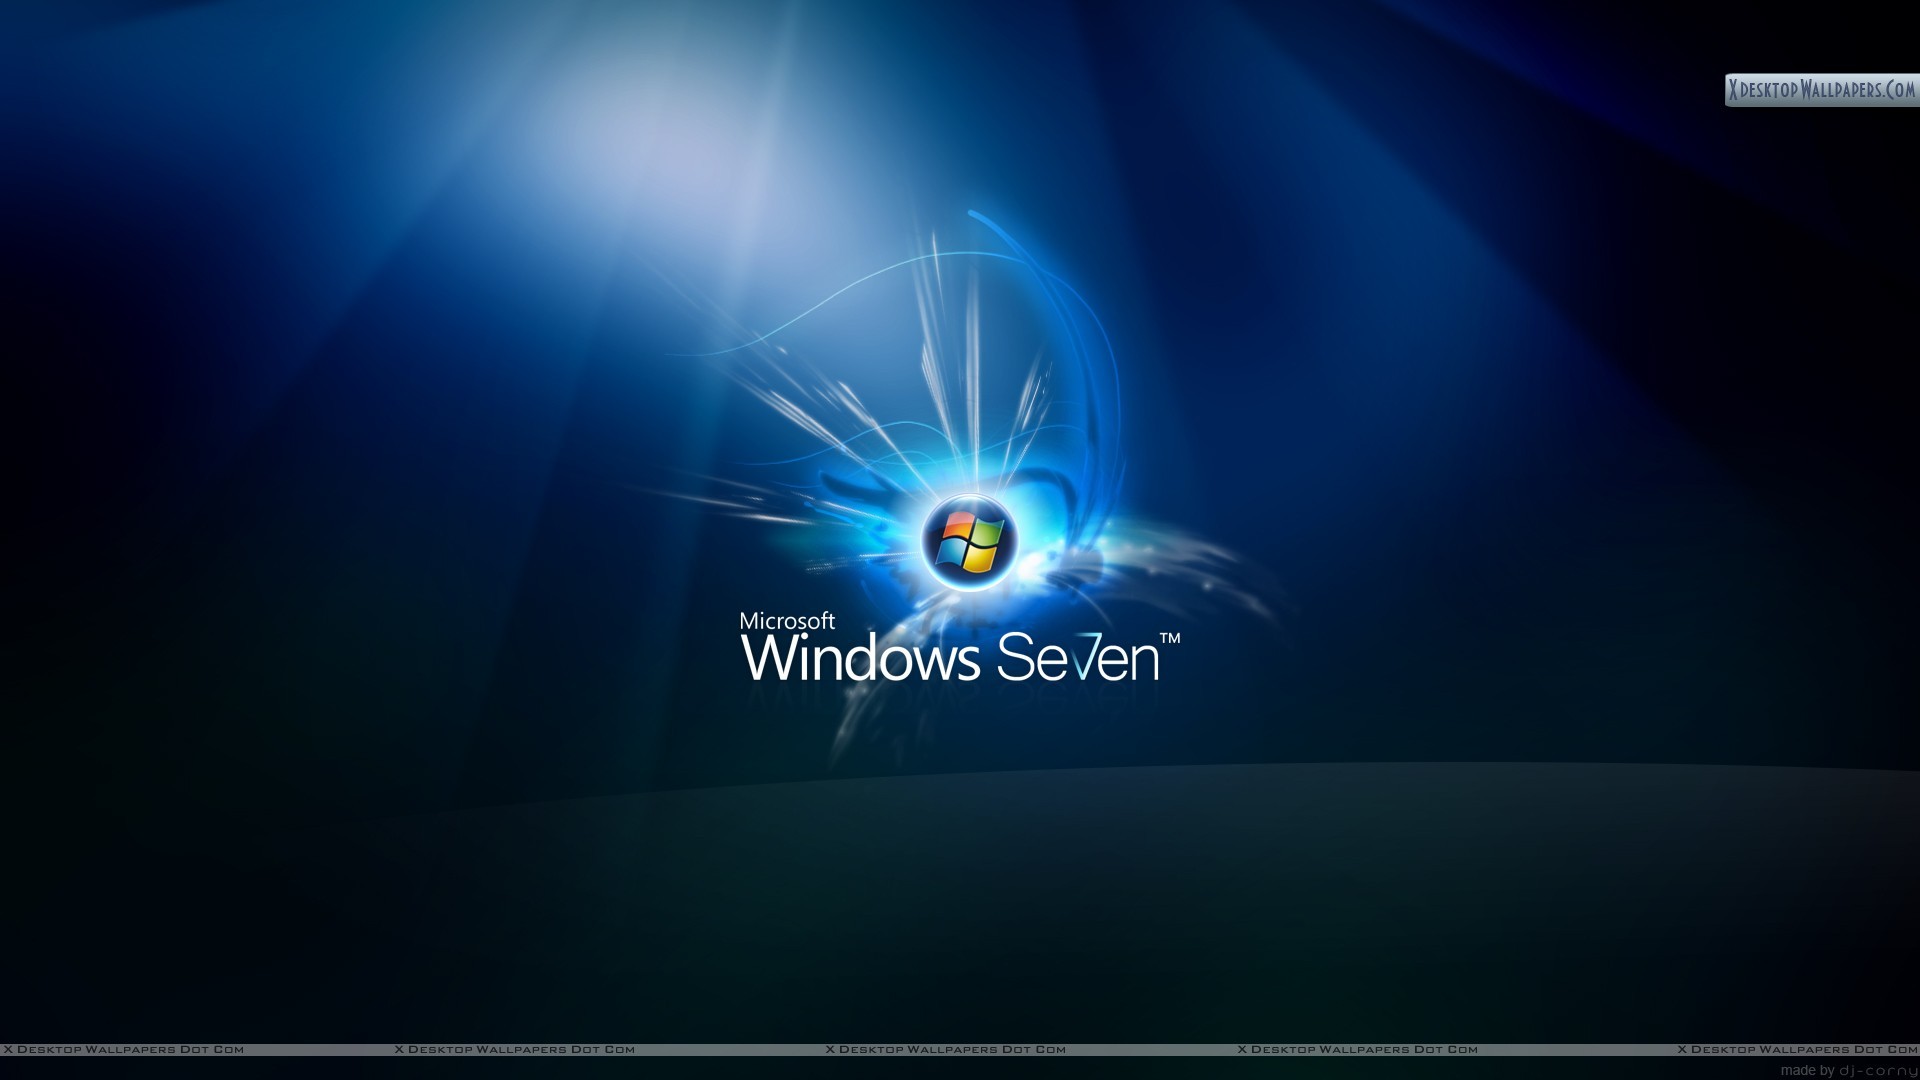 1920x1080 You are viewing wallpaper titled "Windows 7 ...